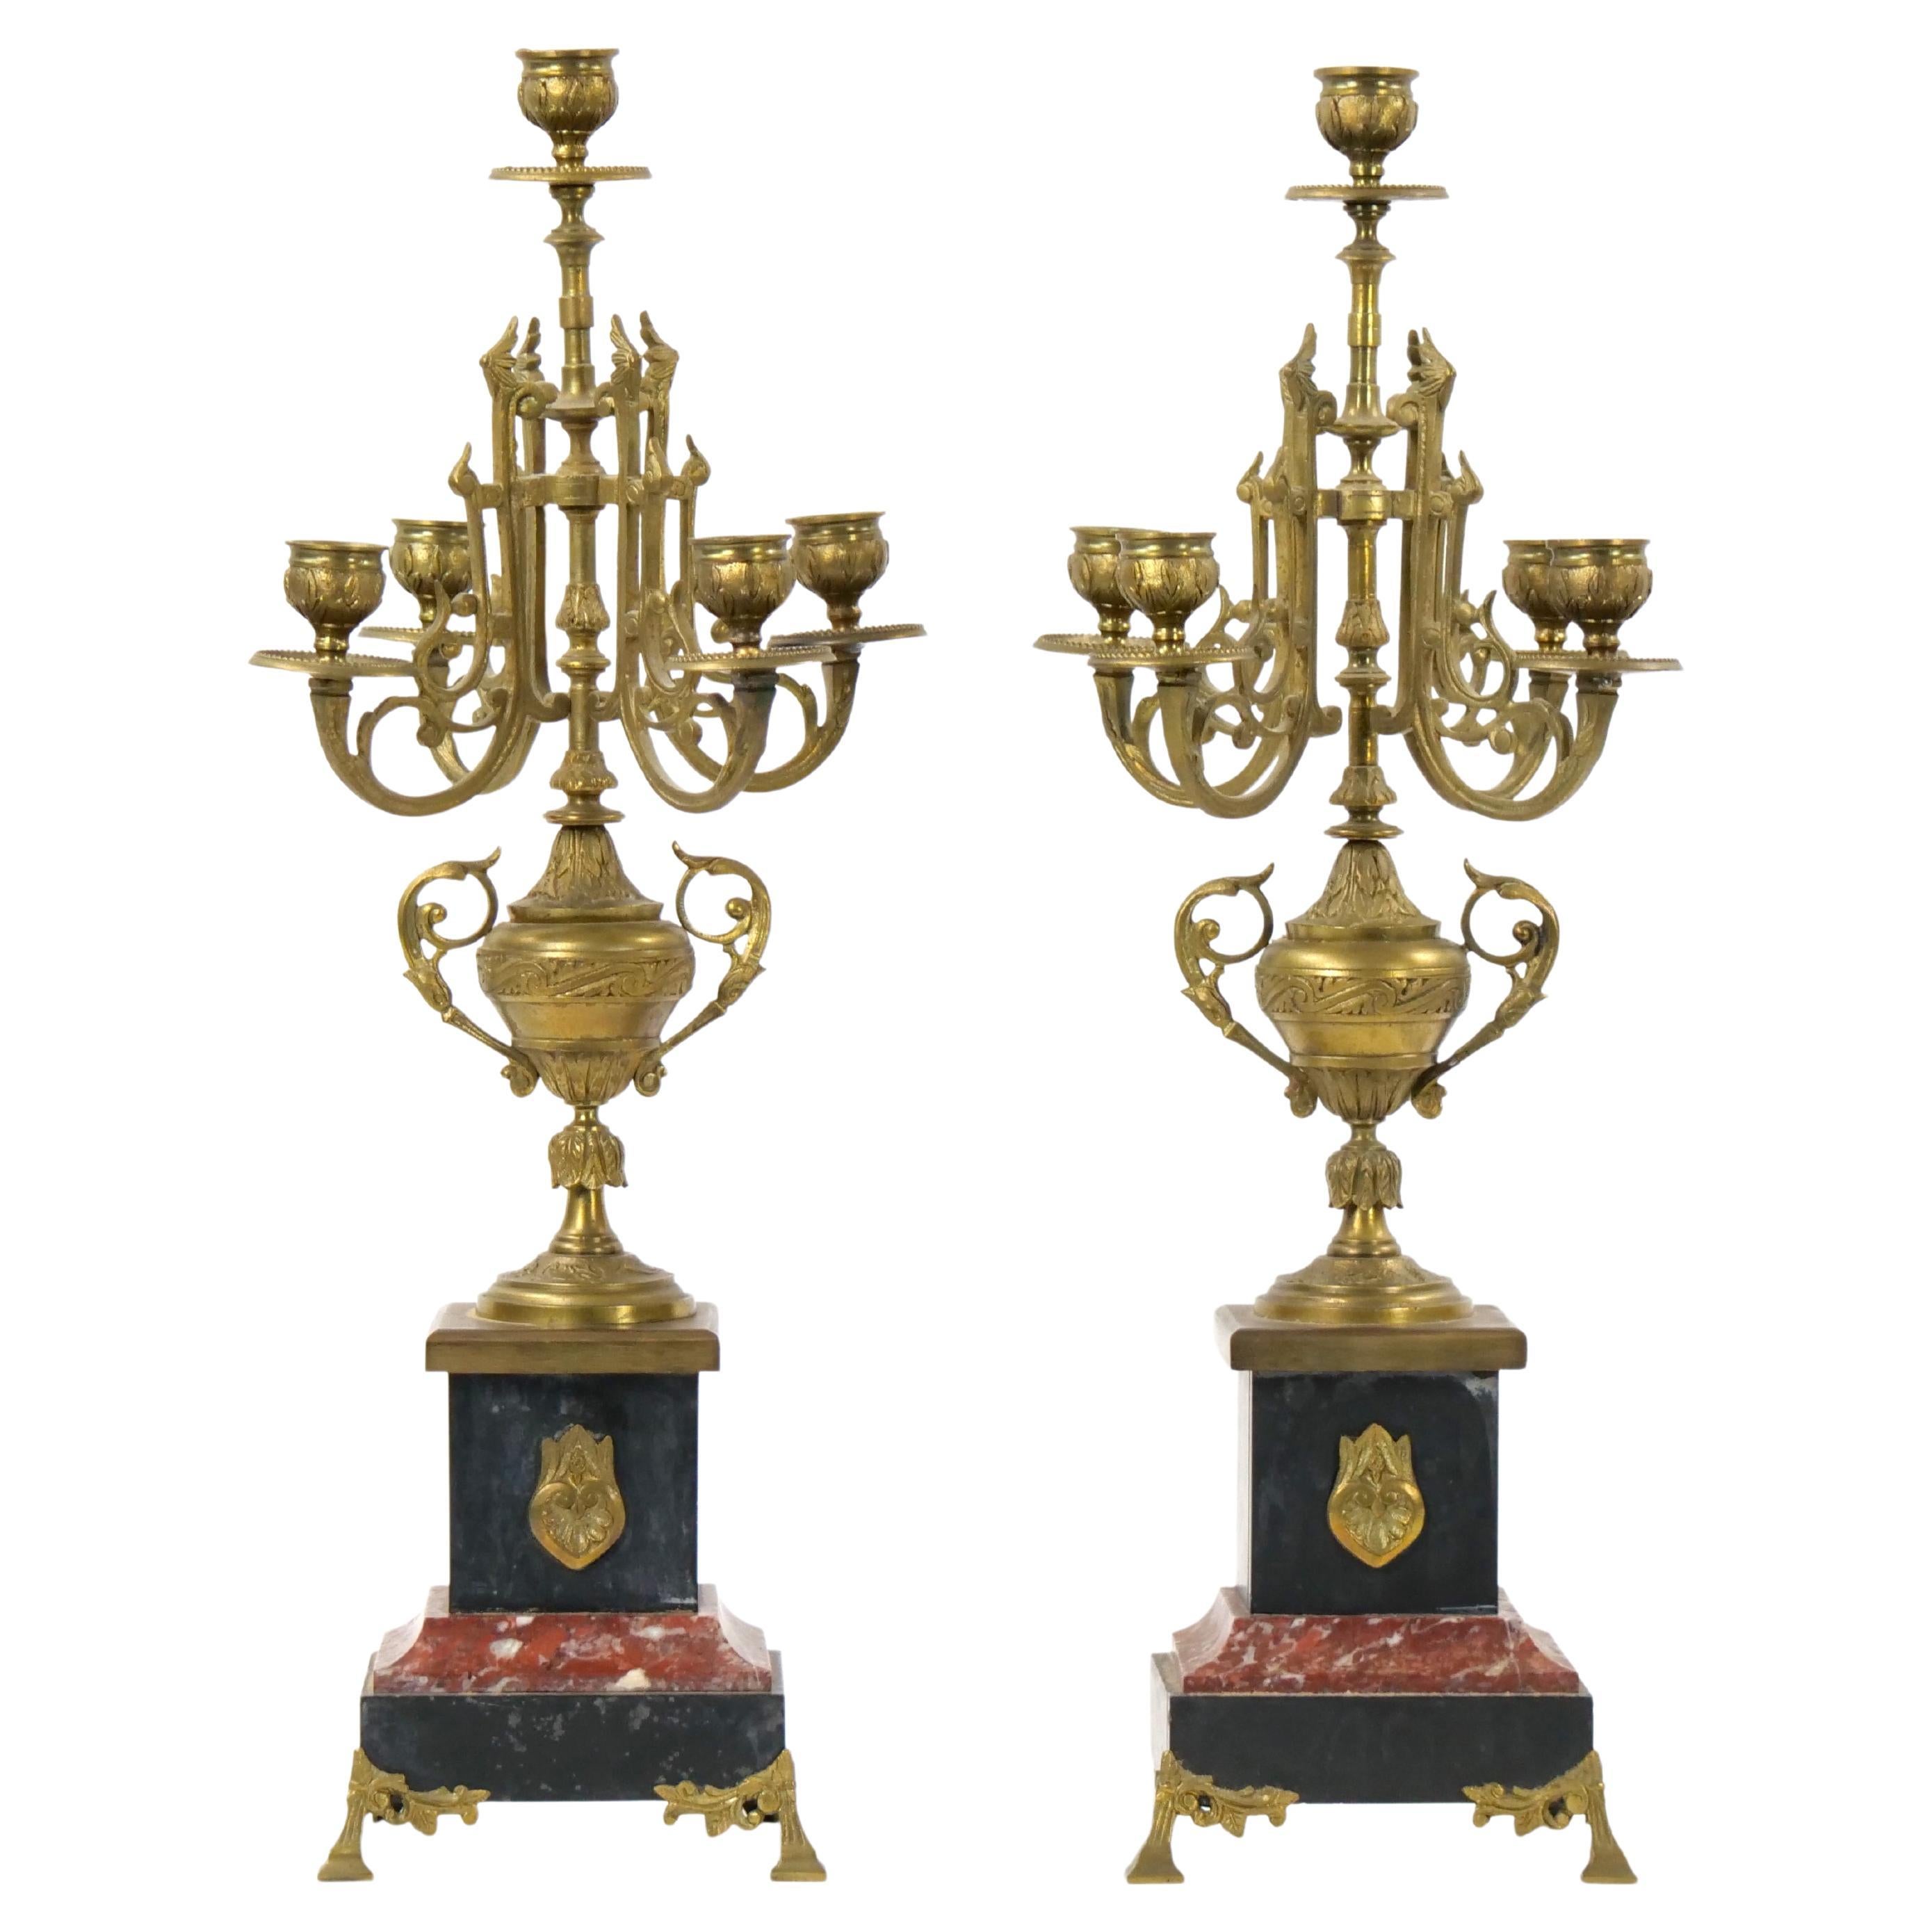 19th Century Gilt Bronze-Mounted Slate & rouge Marble Five Arm Candelabra